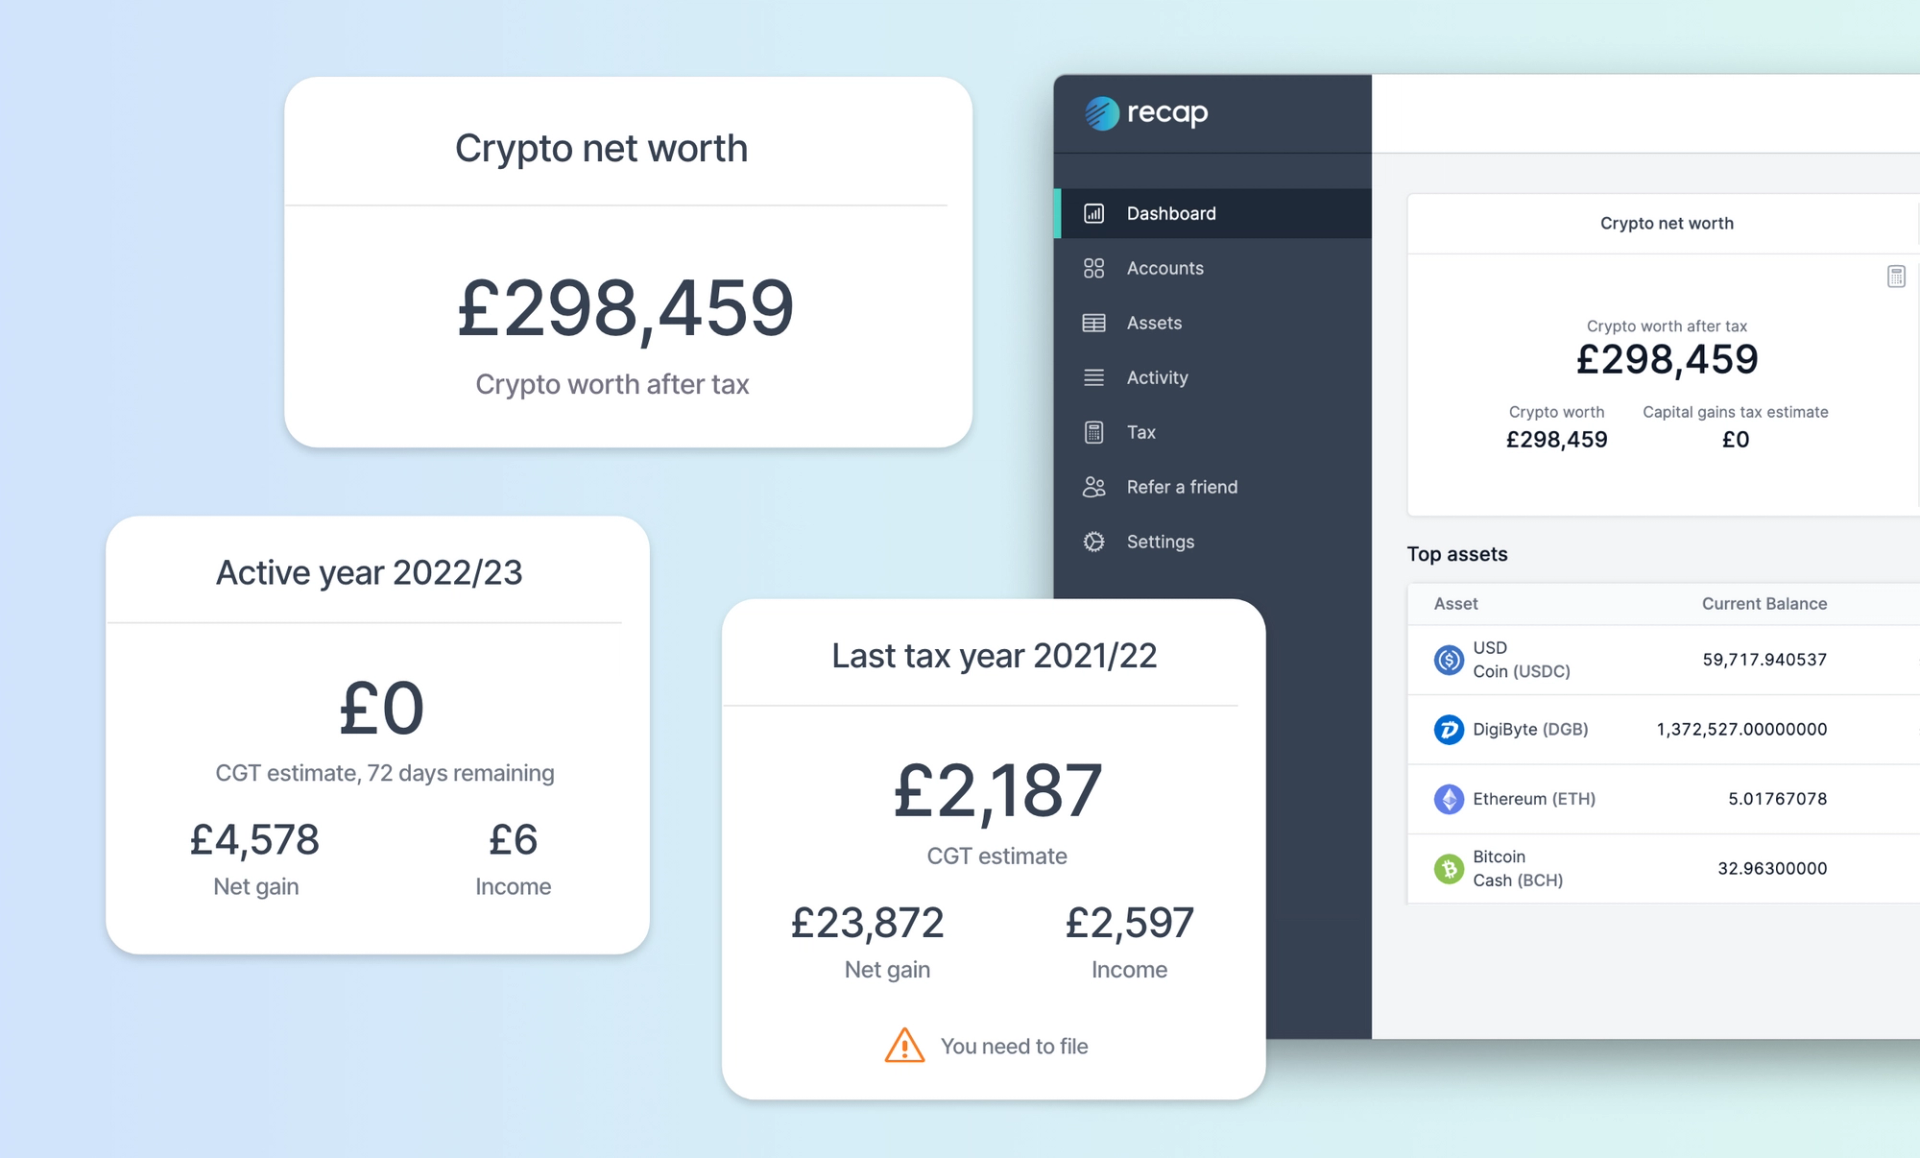 A screen shot of the Recap UK dashboard showing crypto net worth and the estimated capital gains tax for the active and previous tax year.